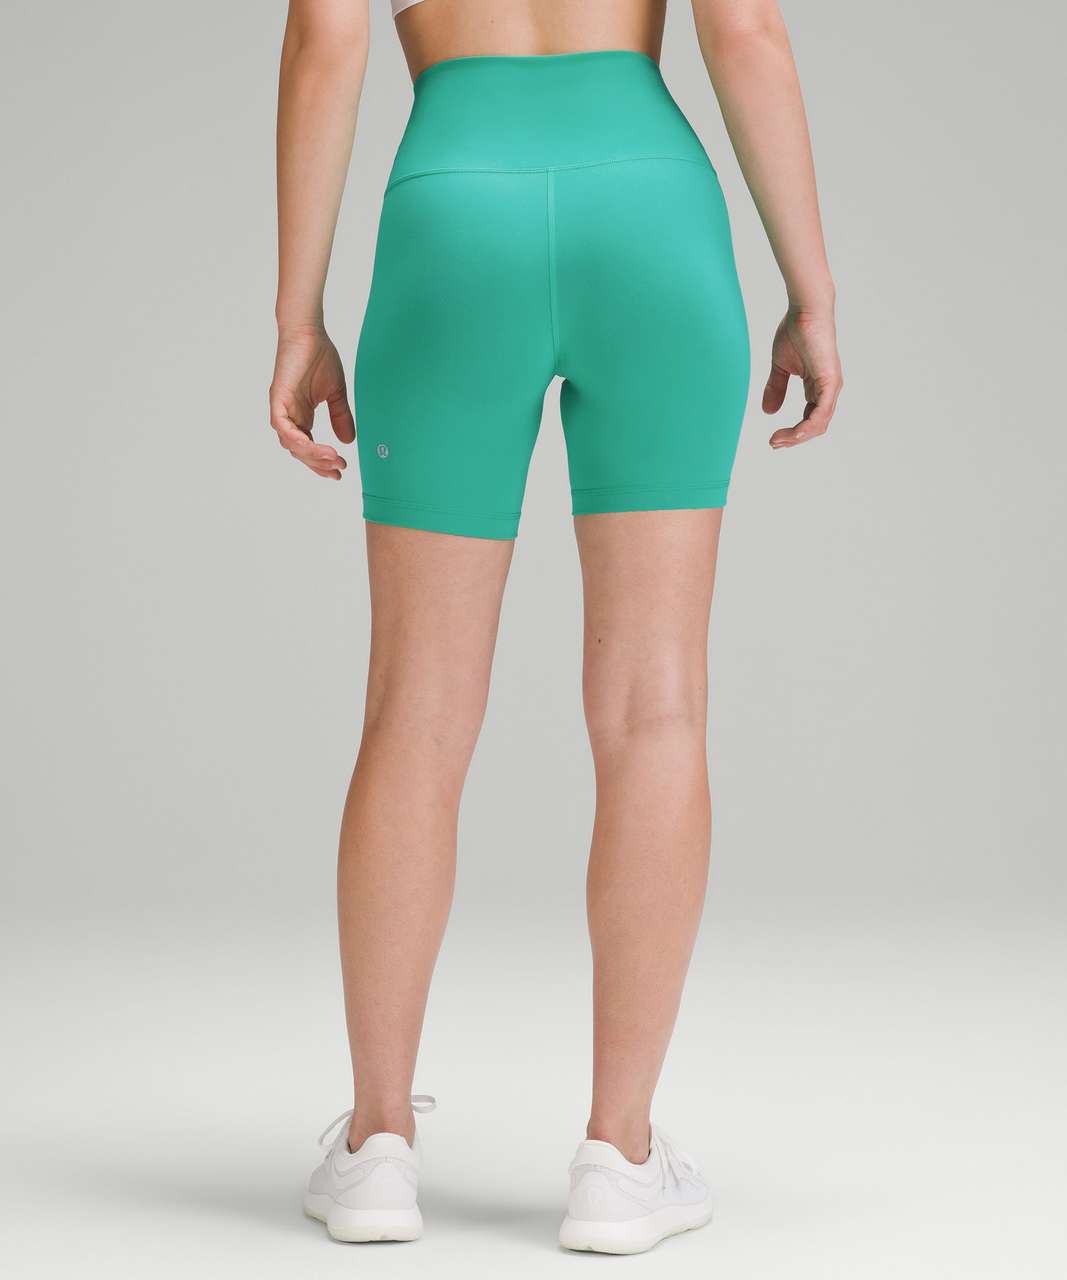 The 10 Best Lululemon Buys, Kelly in the City